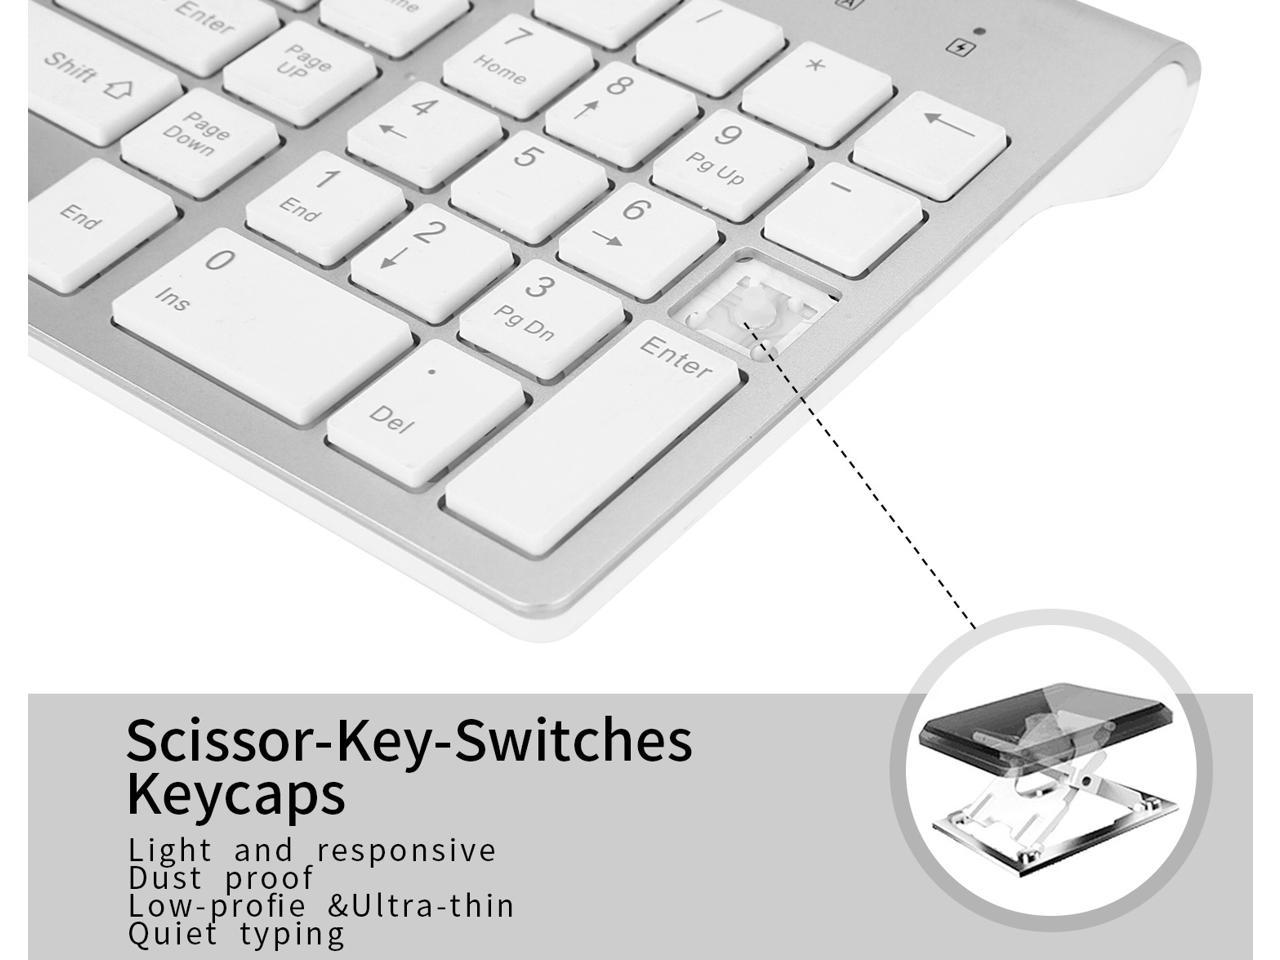 connect apple keyboard and mouse to pc with windows 10